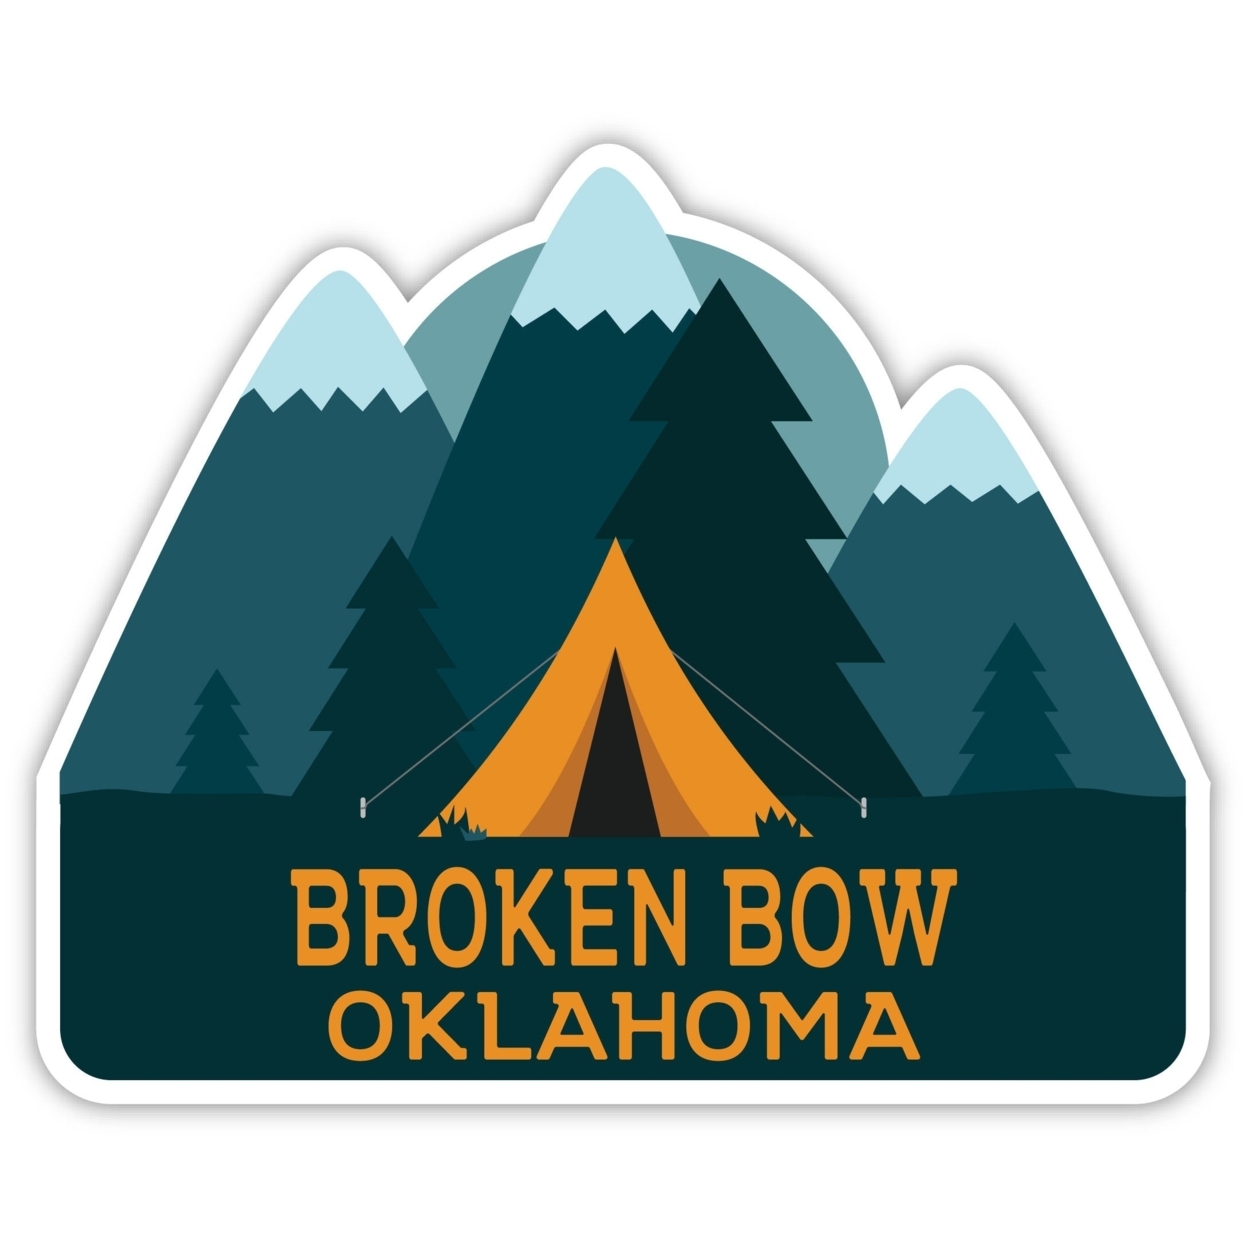 Broken Bow Oklahoma Souvenir Decorative Stickers (Choose Theme And Size) - 4-Pack, 4-Inch, Adventures Awaits